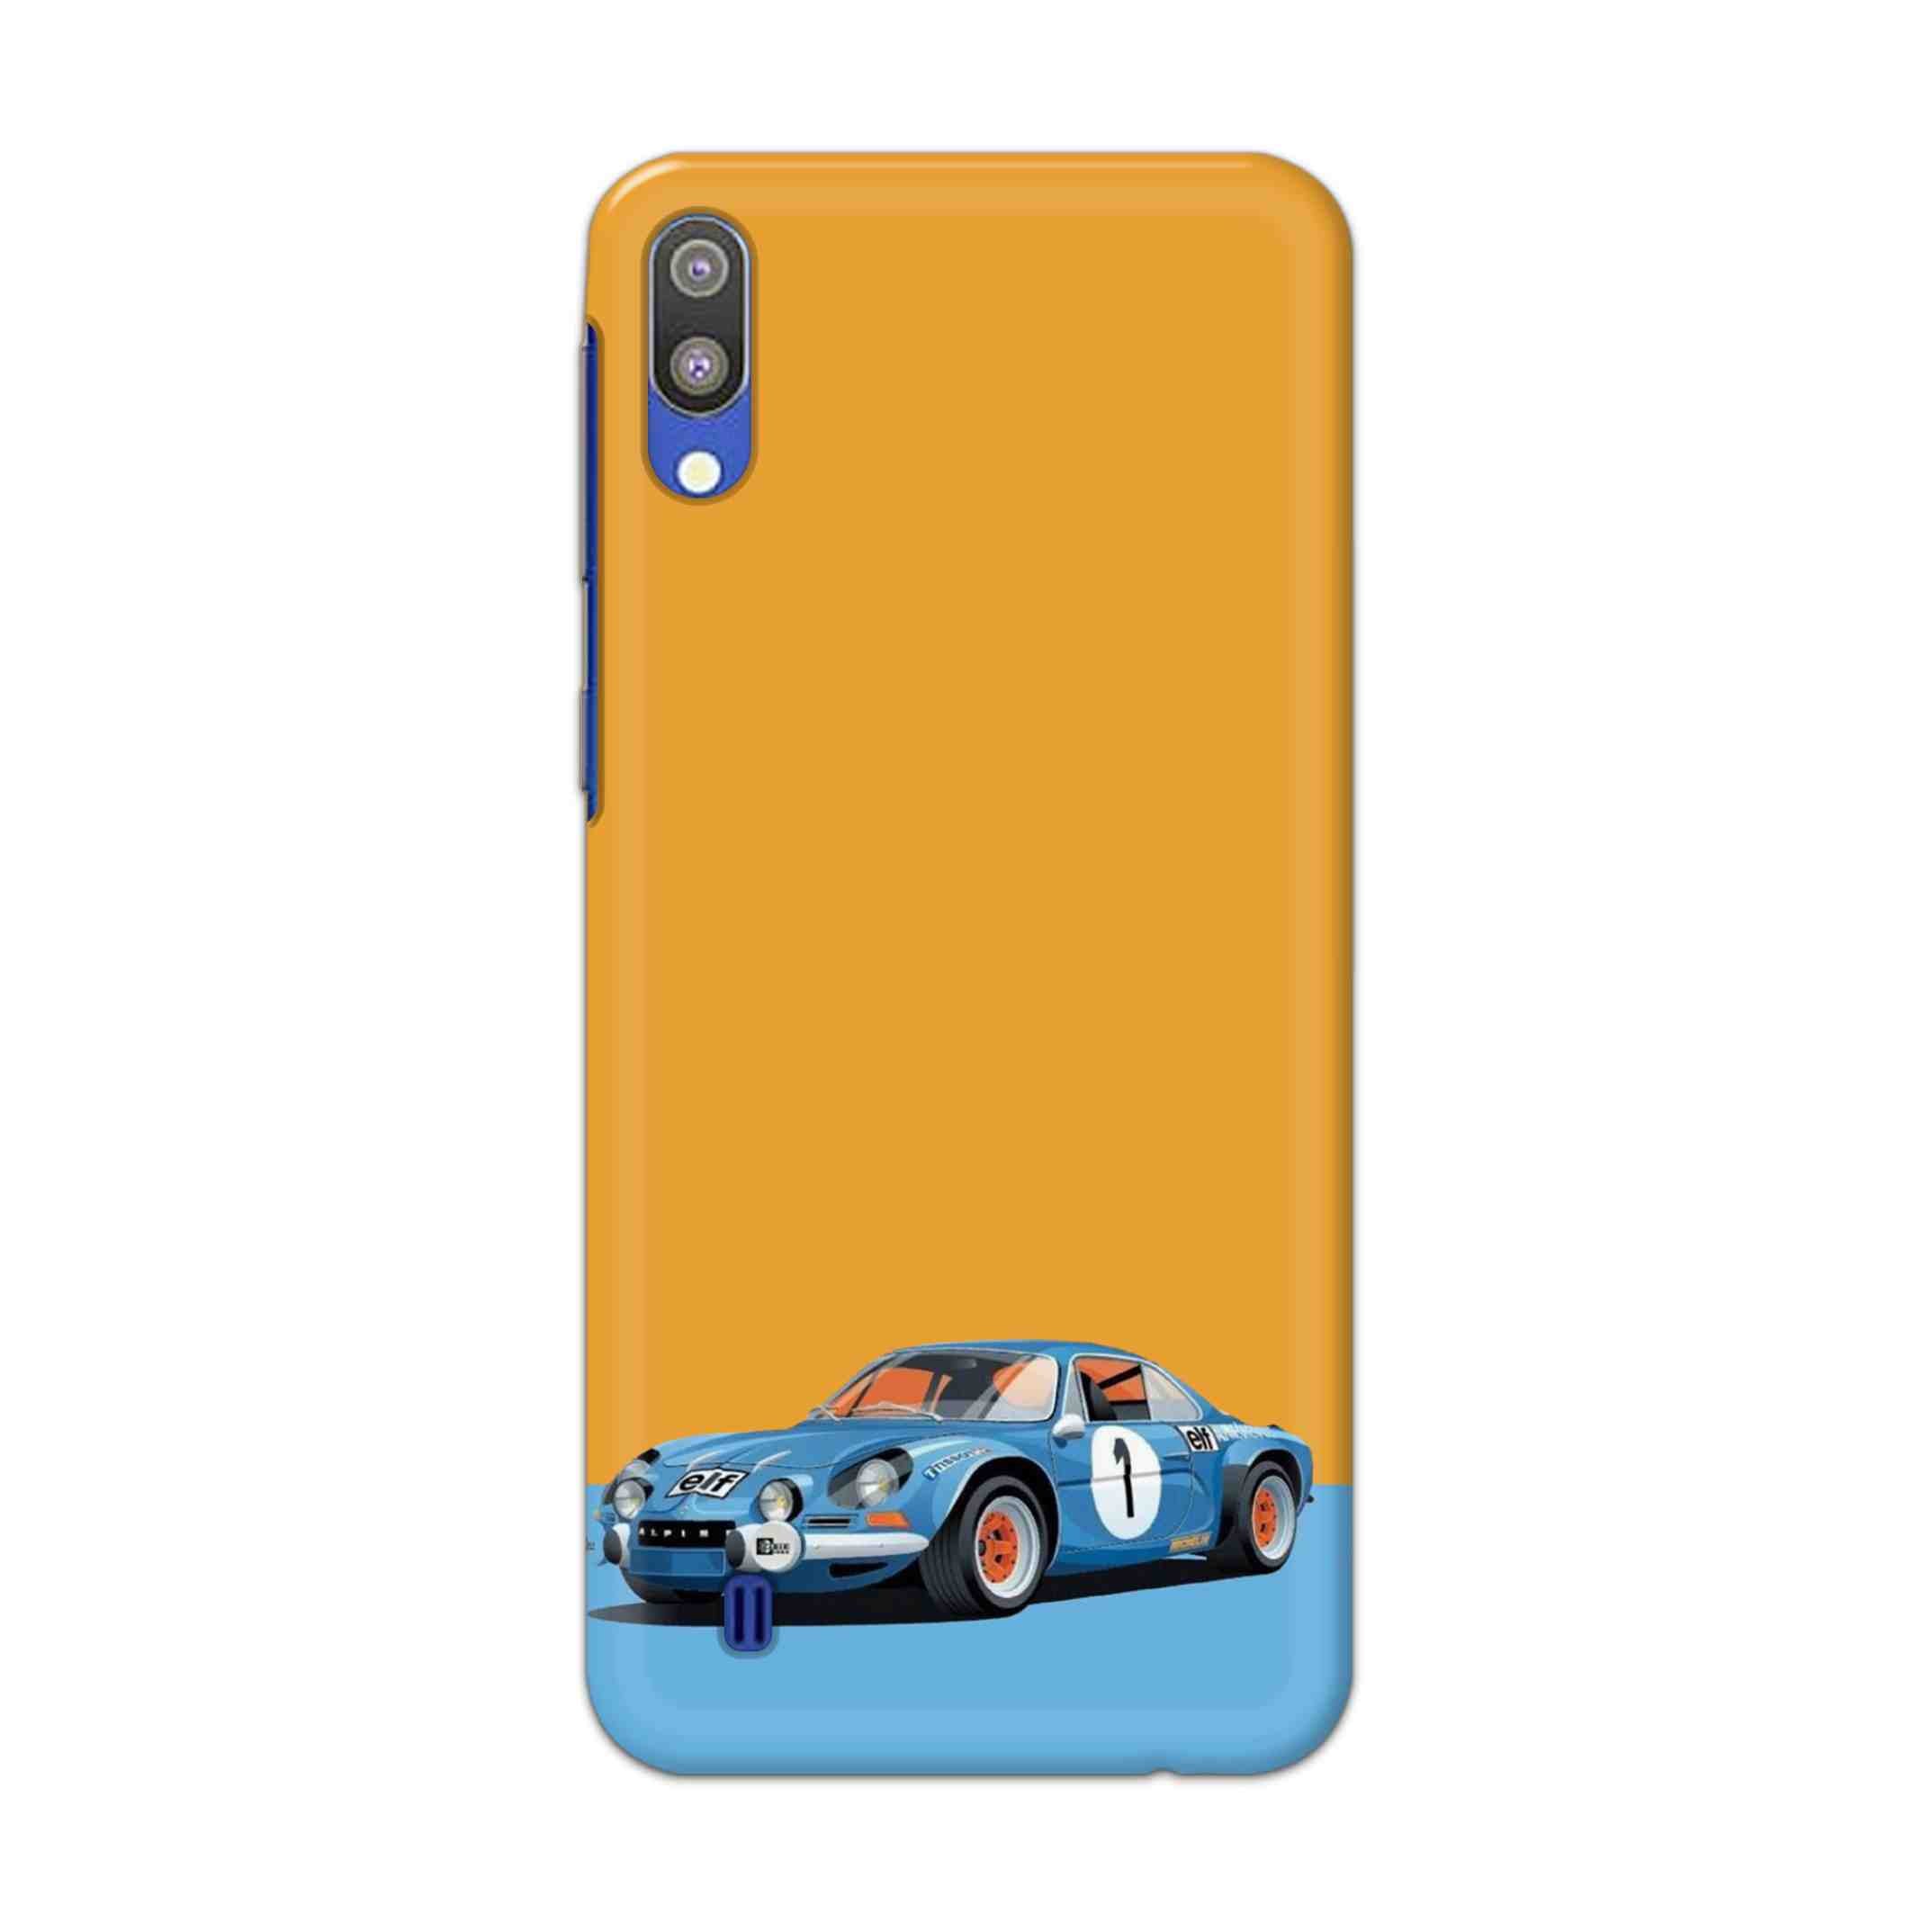 Buy Ferrari F1 Hard Back Mobile Phone Case Cover For Samsung Galaxy M10 Online